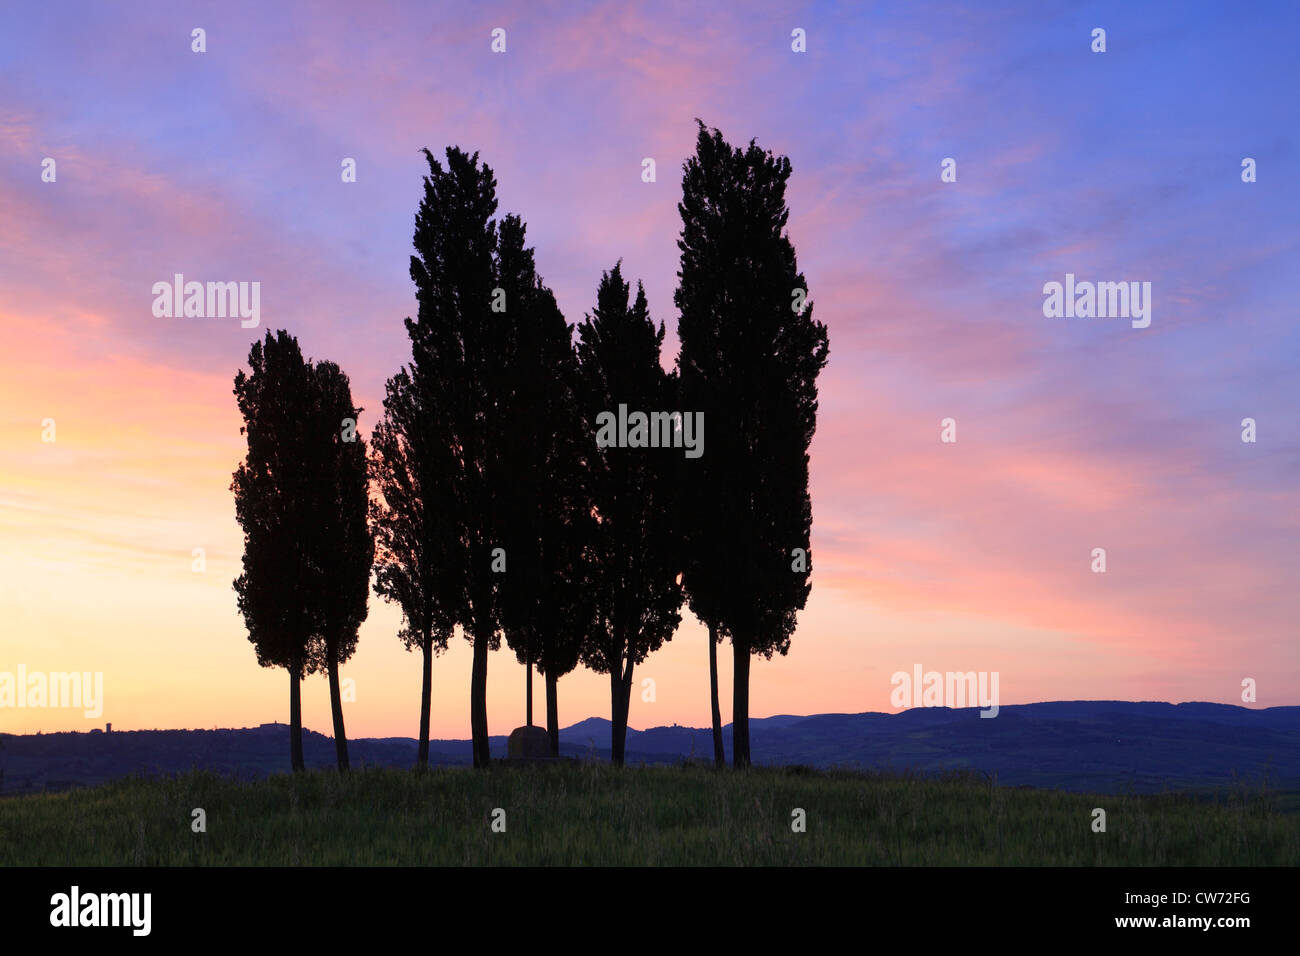 Italian cypress (Cupressus sempervirens), group of cypresses at sunset, Italy, Tuscany Stock Photo